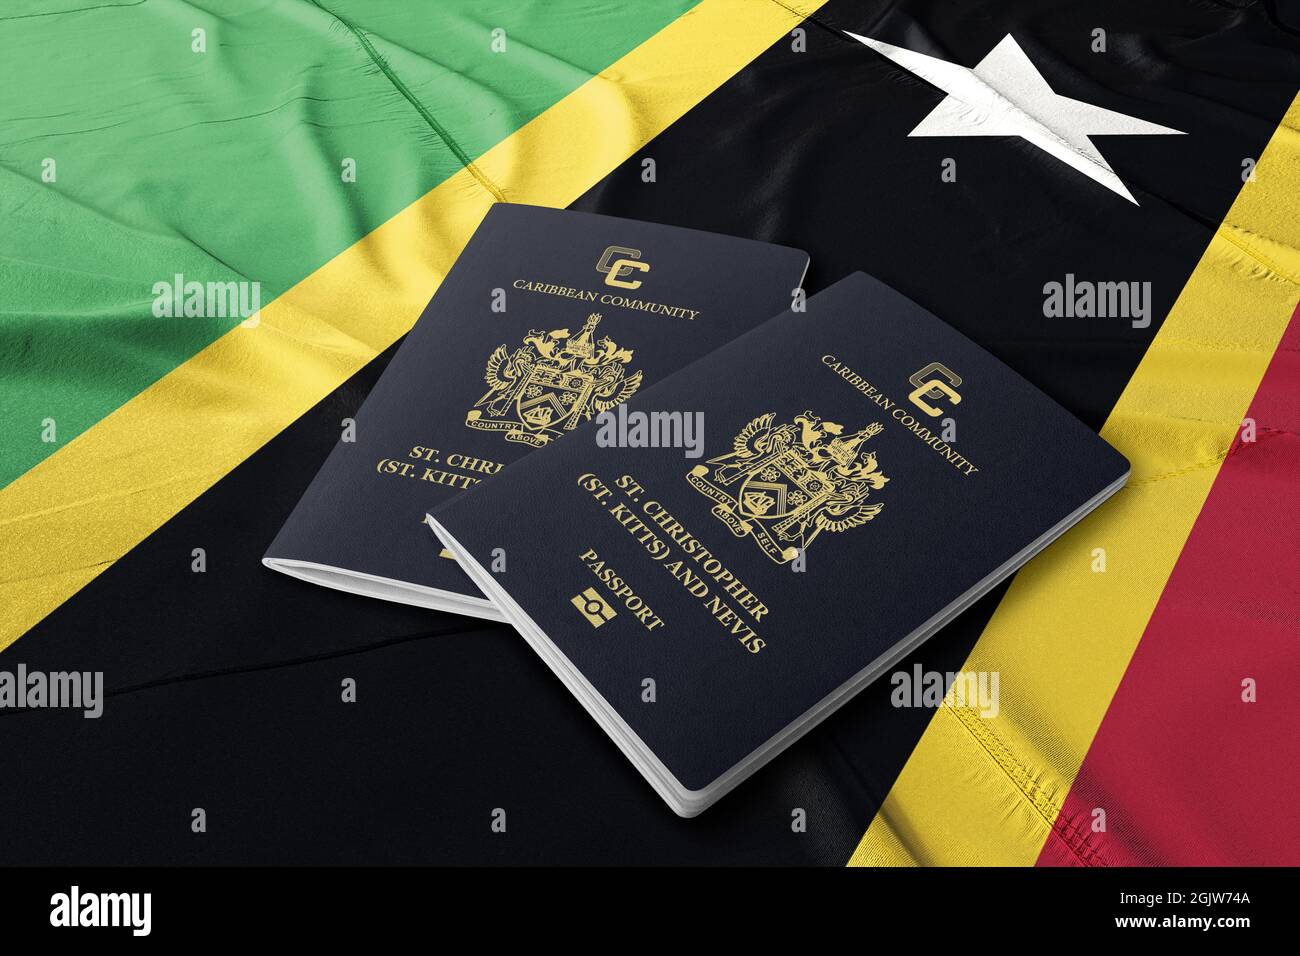 Saint Kitts and Nevis Passport Known for Saint Kitts and Nevis Travel, Citizenship by Investment, Caribbean Country Stock Photo